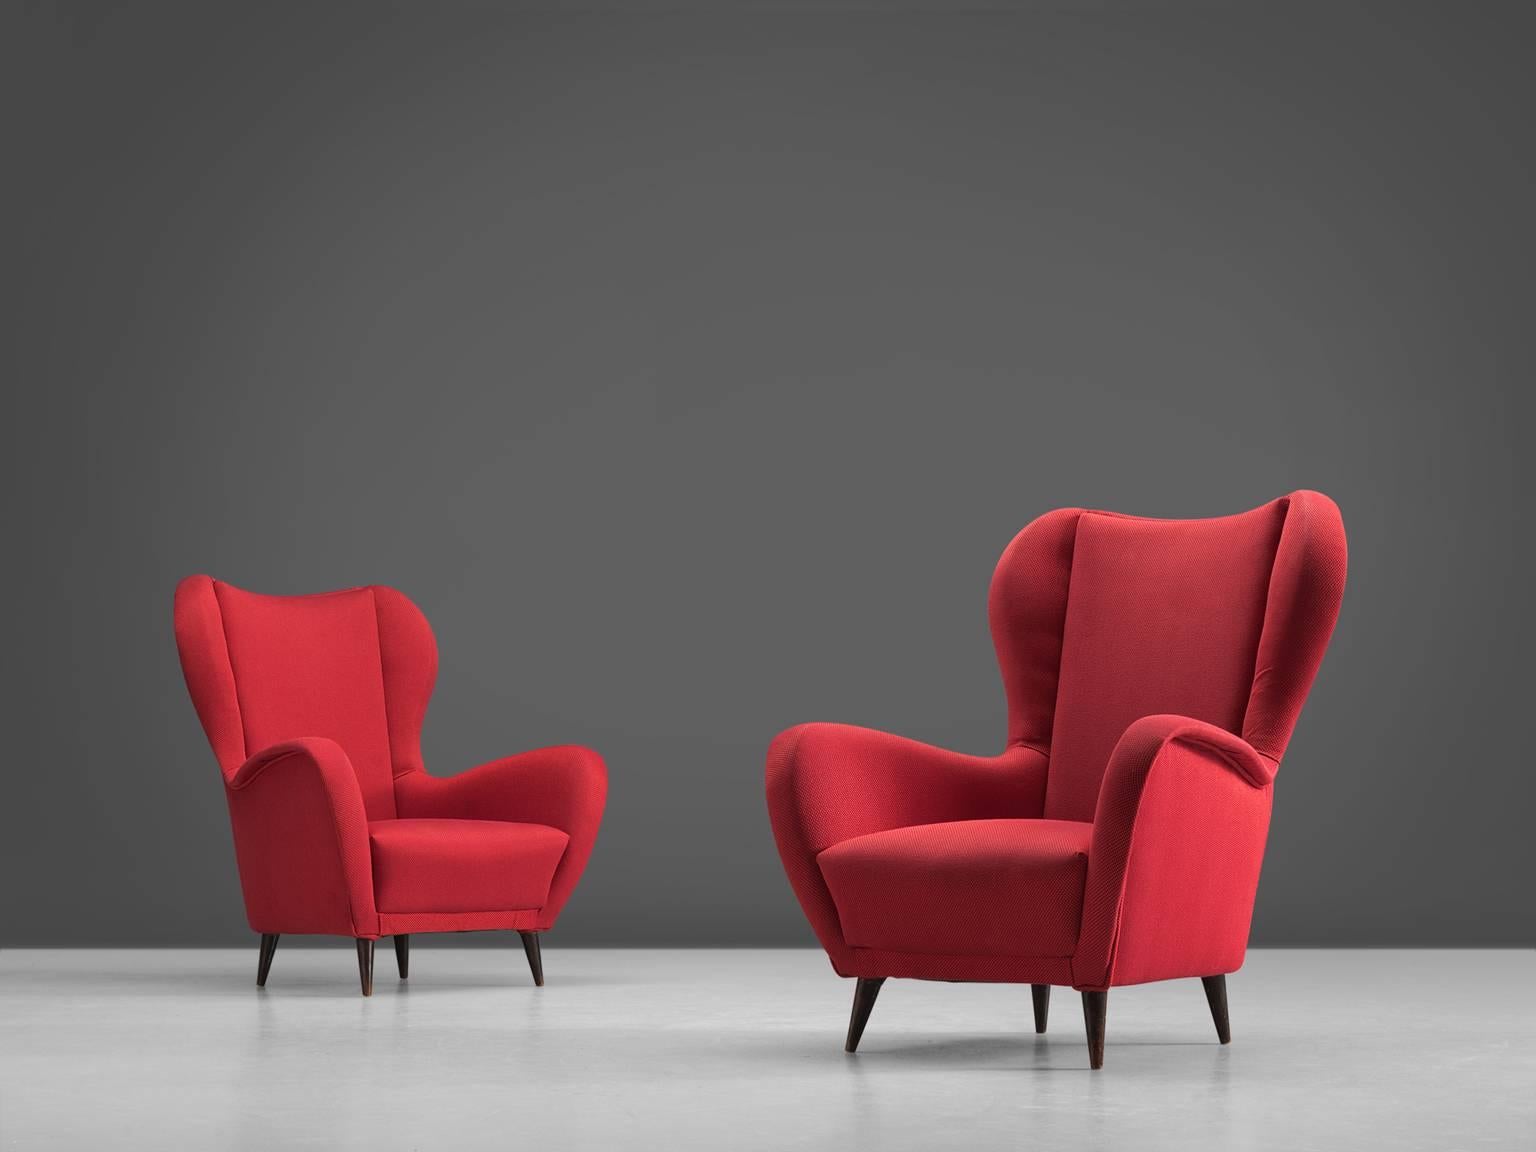 Pair of armchairs, red fabric, wood, Italy, 1950s.

These lounge chairs are both voluptuous and grand as they are comfortable. The chairs embody a semi-high wingback composed of curvaceous lines. The design fits perfectly into the Italian ethos of